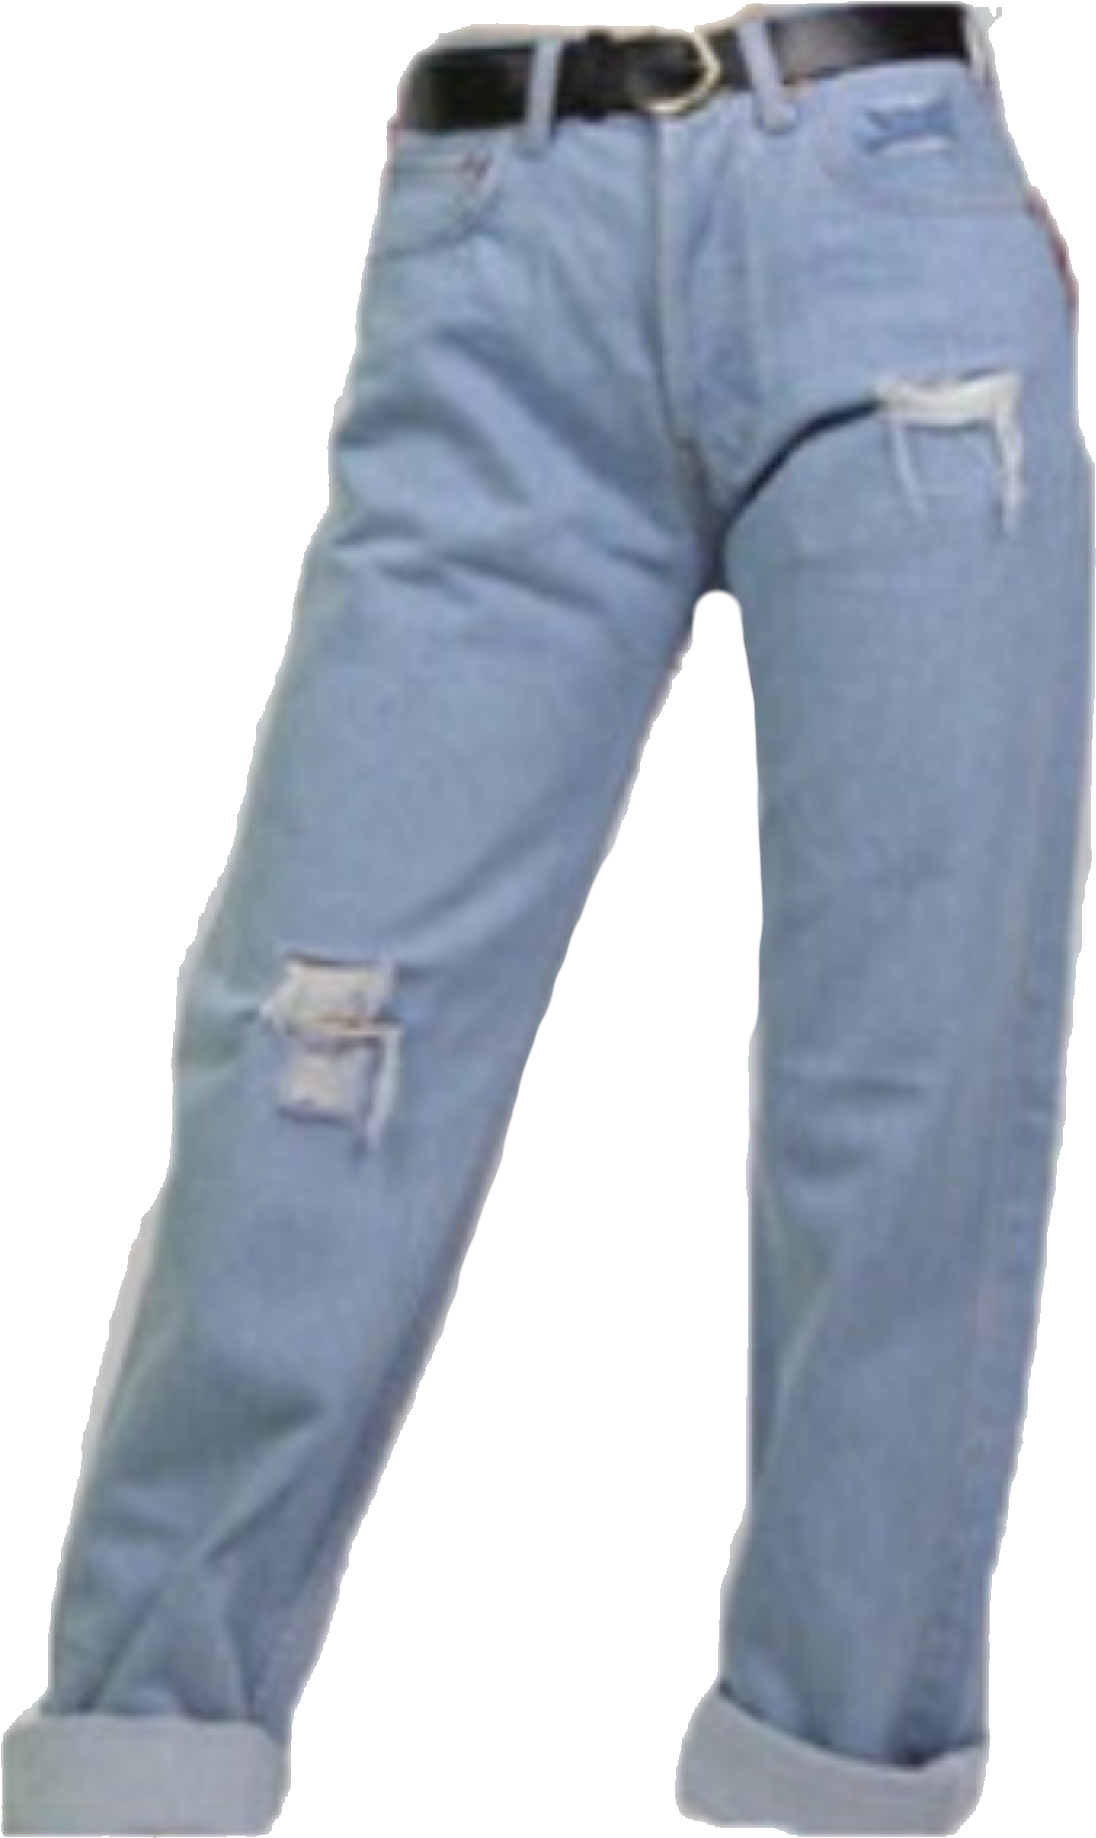 Mom Jeans Png (1575x2048), Png Download